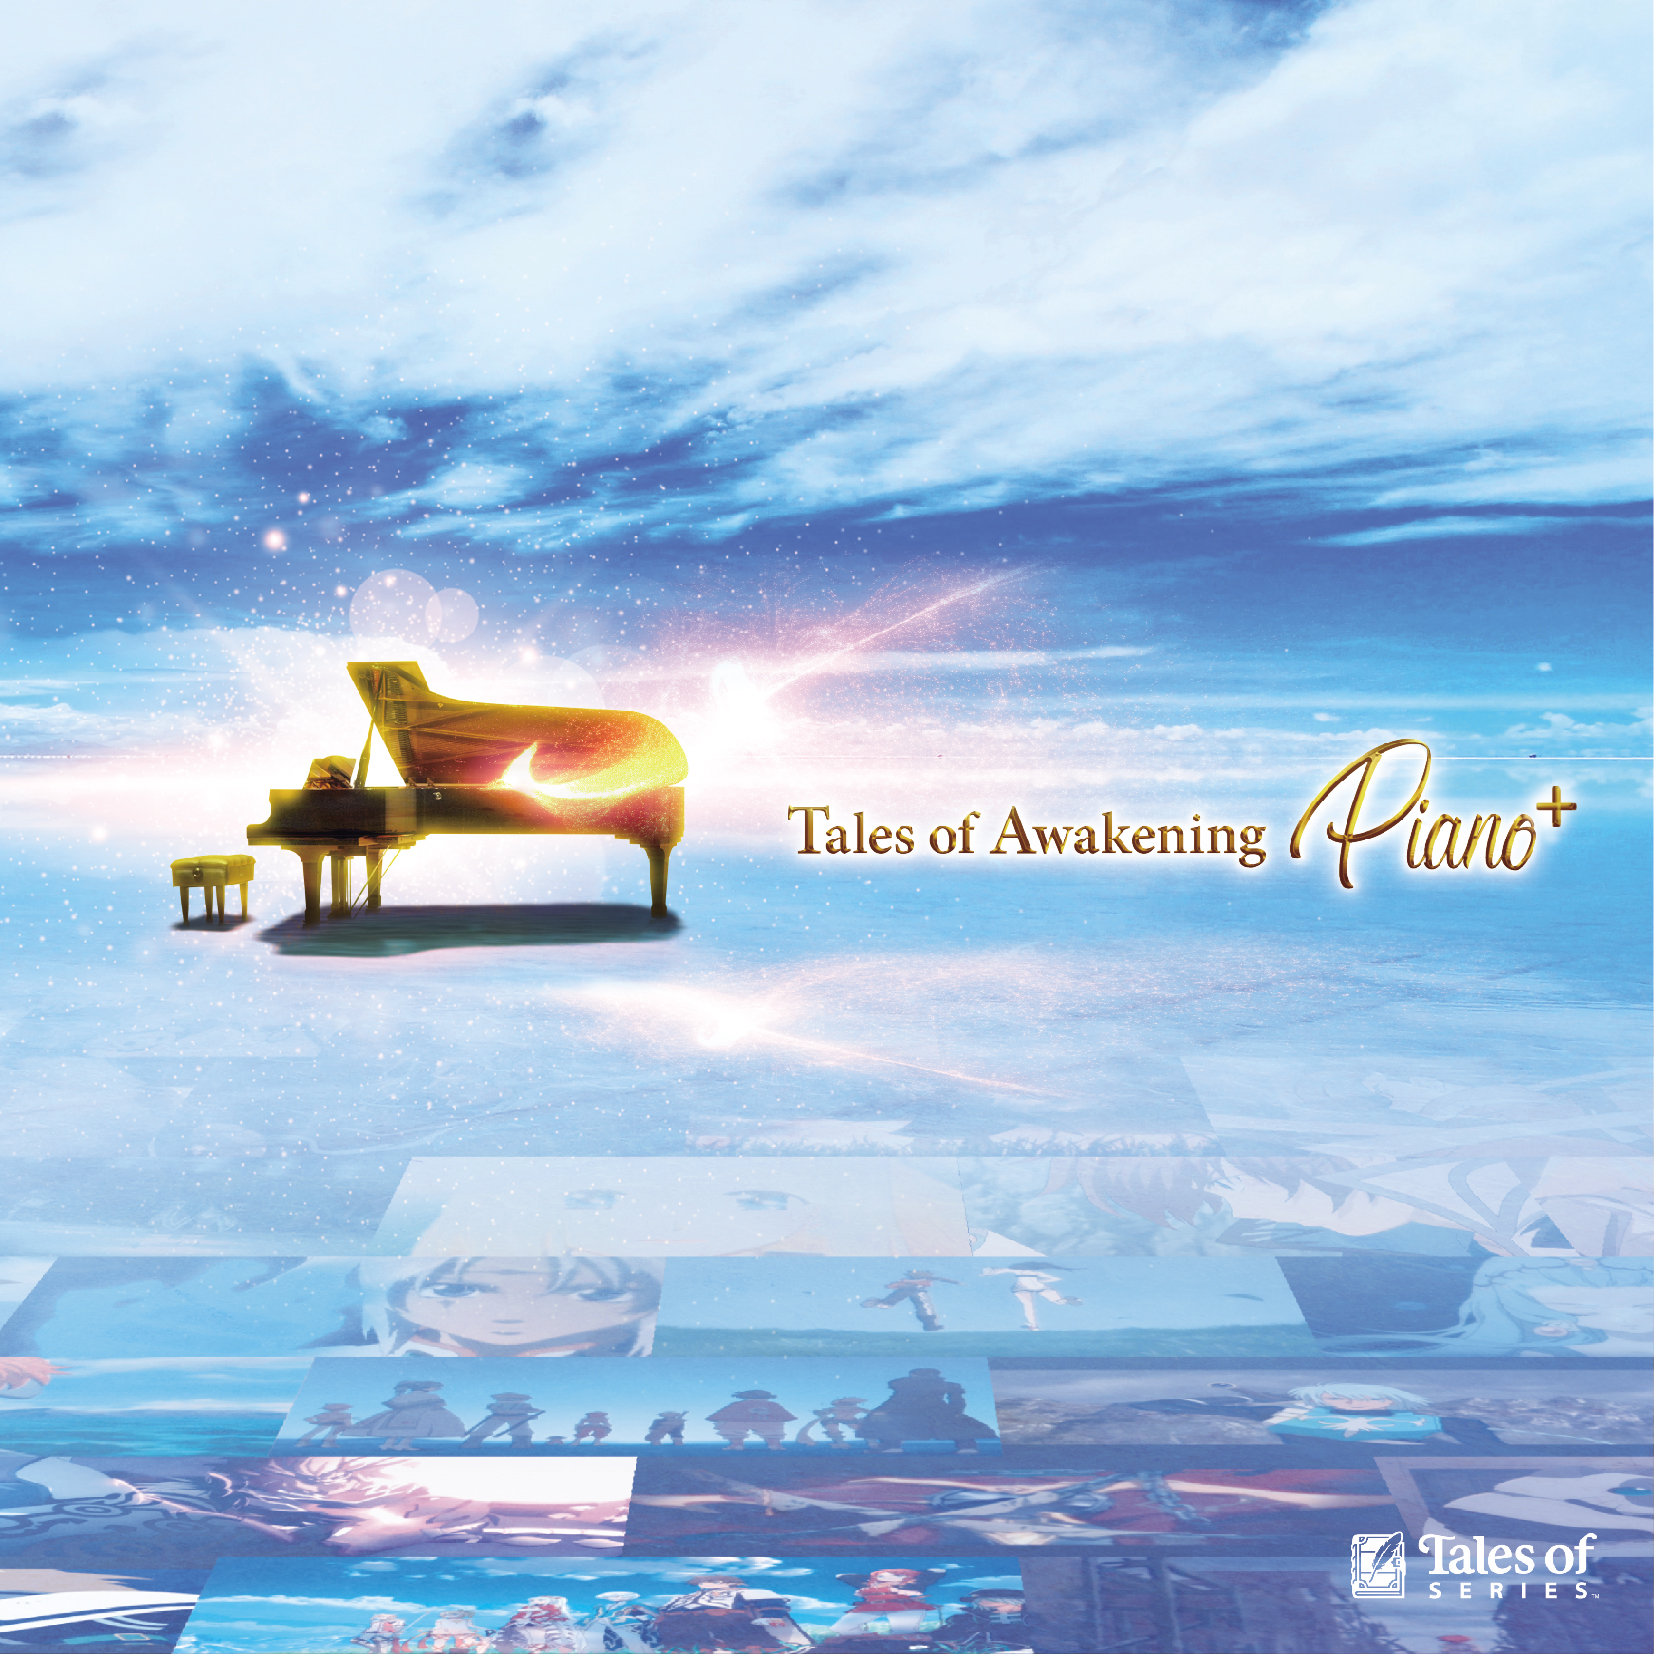 Tales of Awakening Piano + & Positive Gate by Tales of Dreamers Songs Now Available on Streaming Services